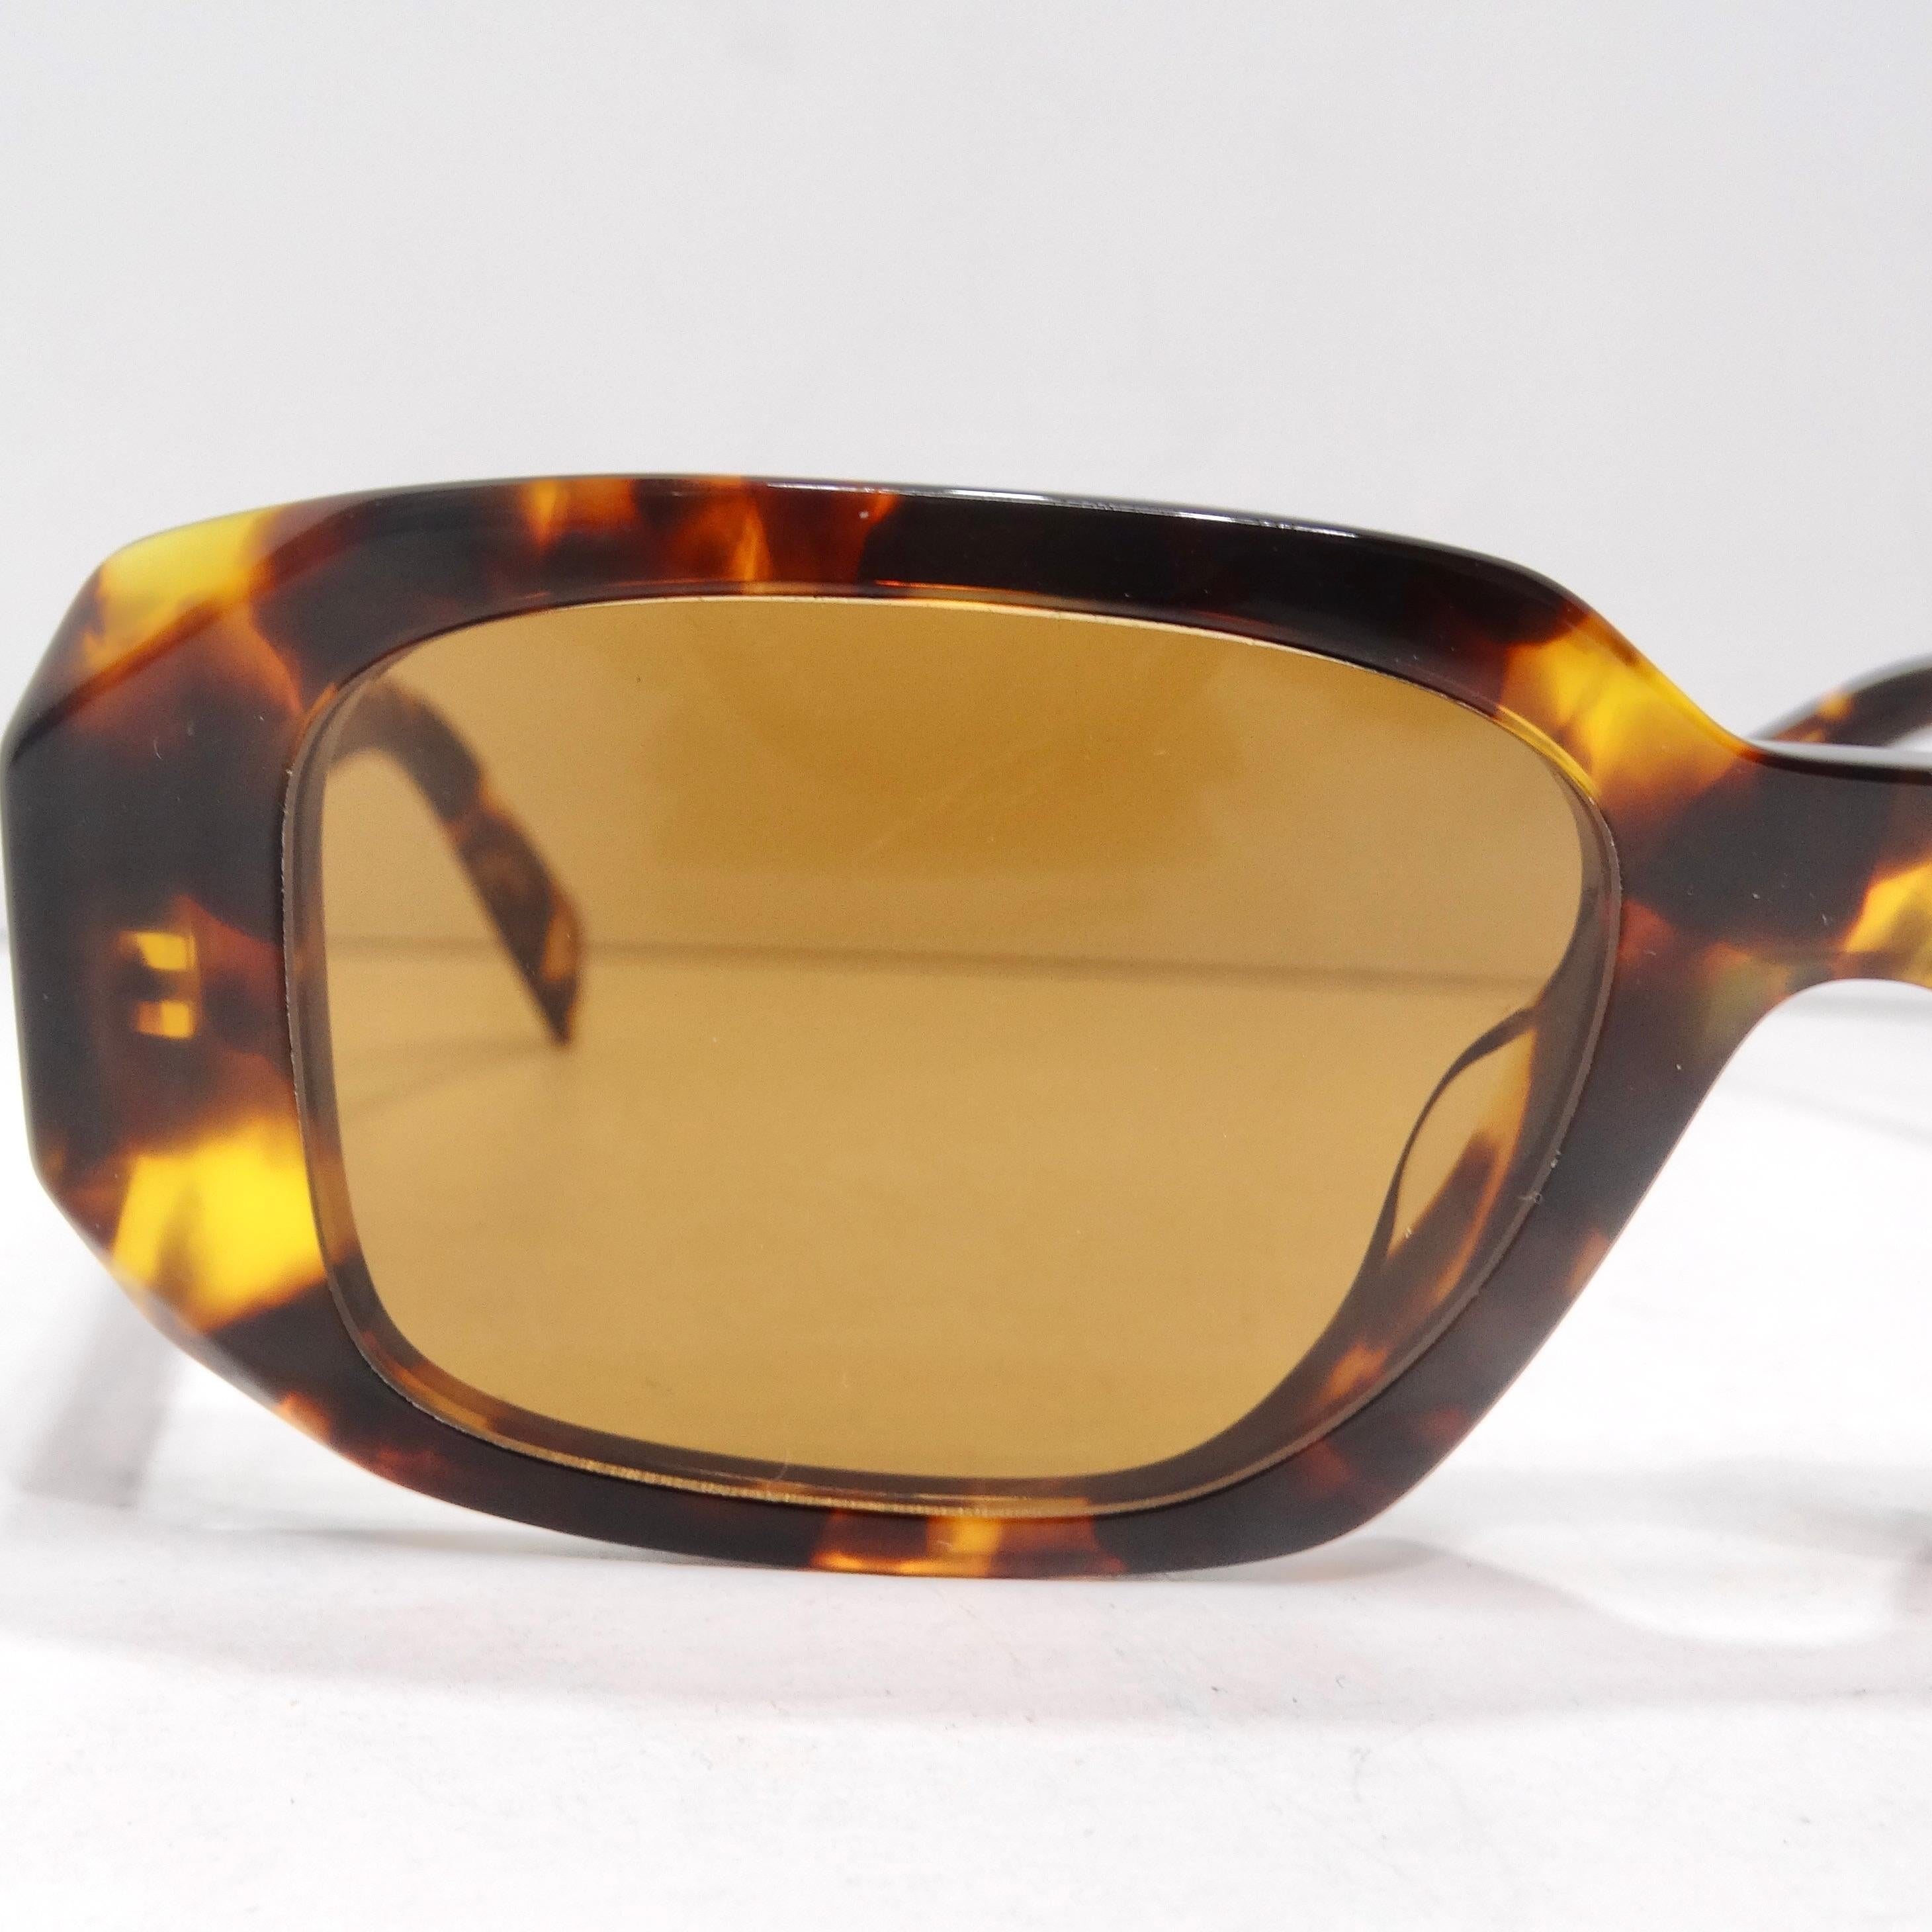 Prada Eyewear Tortoise Shell Square Frame Sunglasses In Excellent Condition For Sale In Scottsdale, AZ